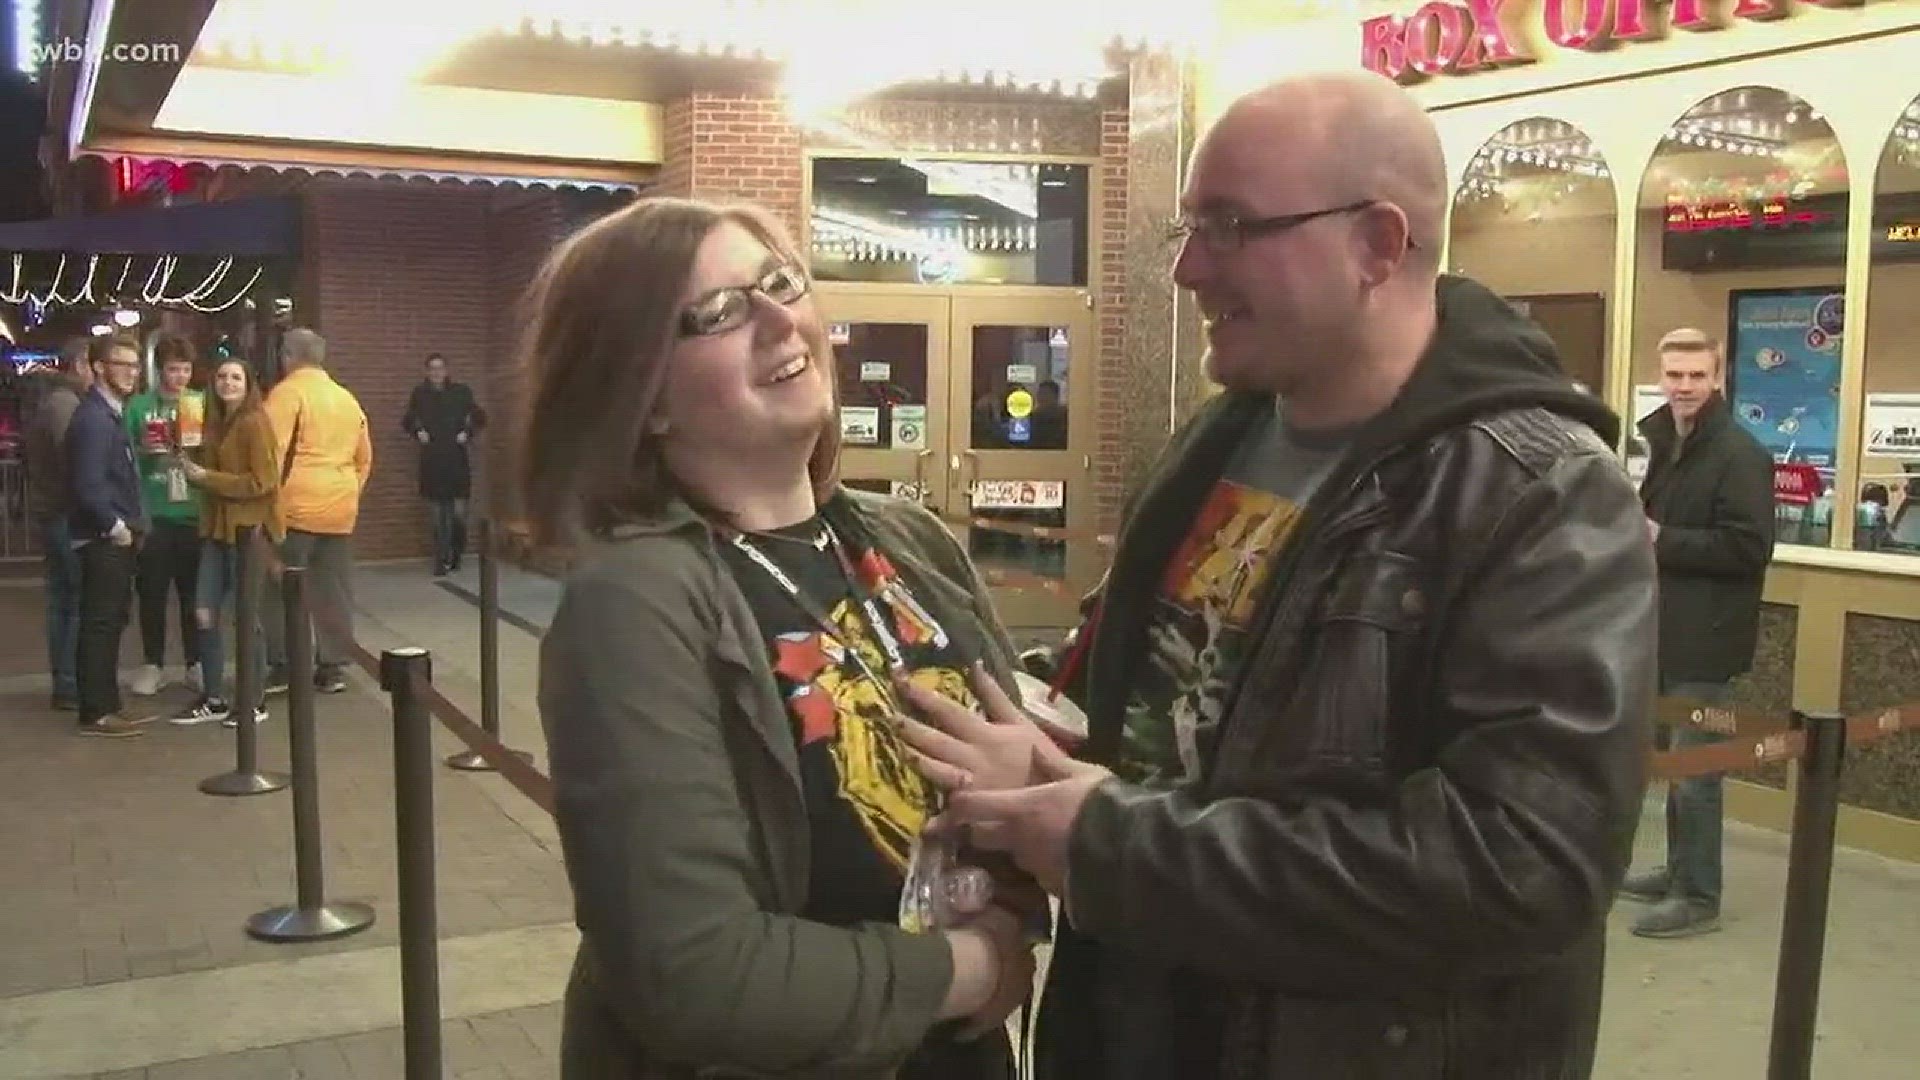 Dec. 14, 2017: Two Star Wars fans' lives were changed forever after the premiere of Star Wars: The Last Jedi in downtown Knoxville